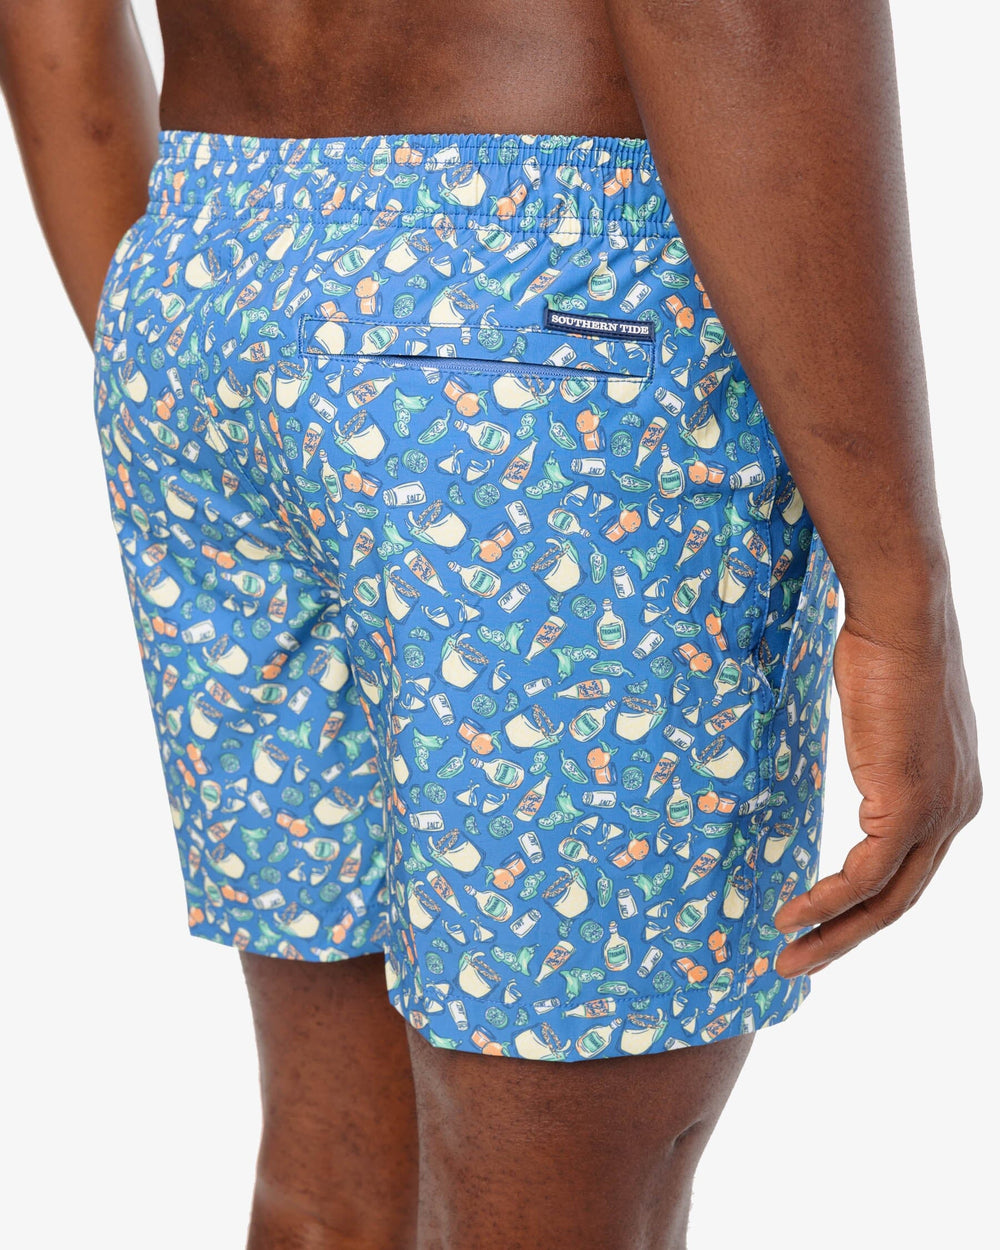 The detail view of the Southern Tide Marg Madness Printed Swim Trunk by Southern Tide - Atlantic Blue